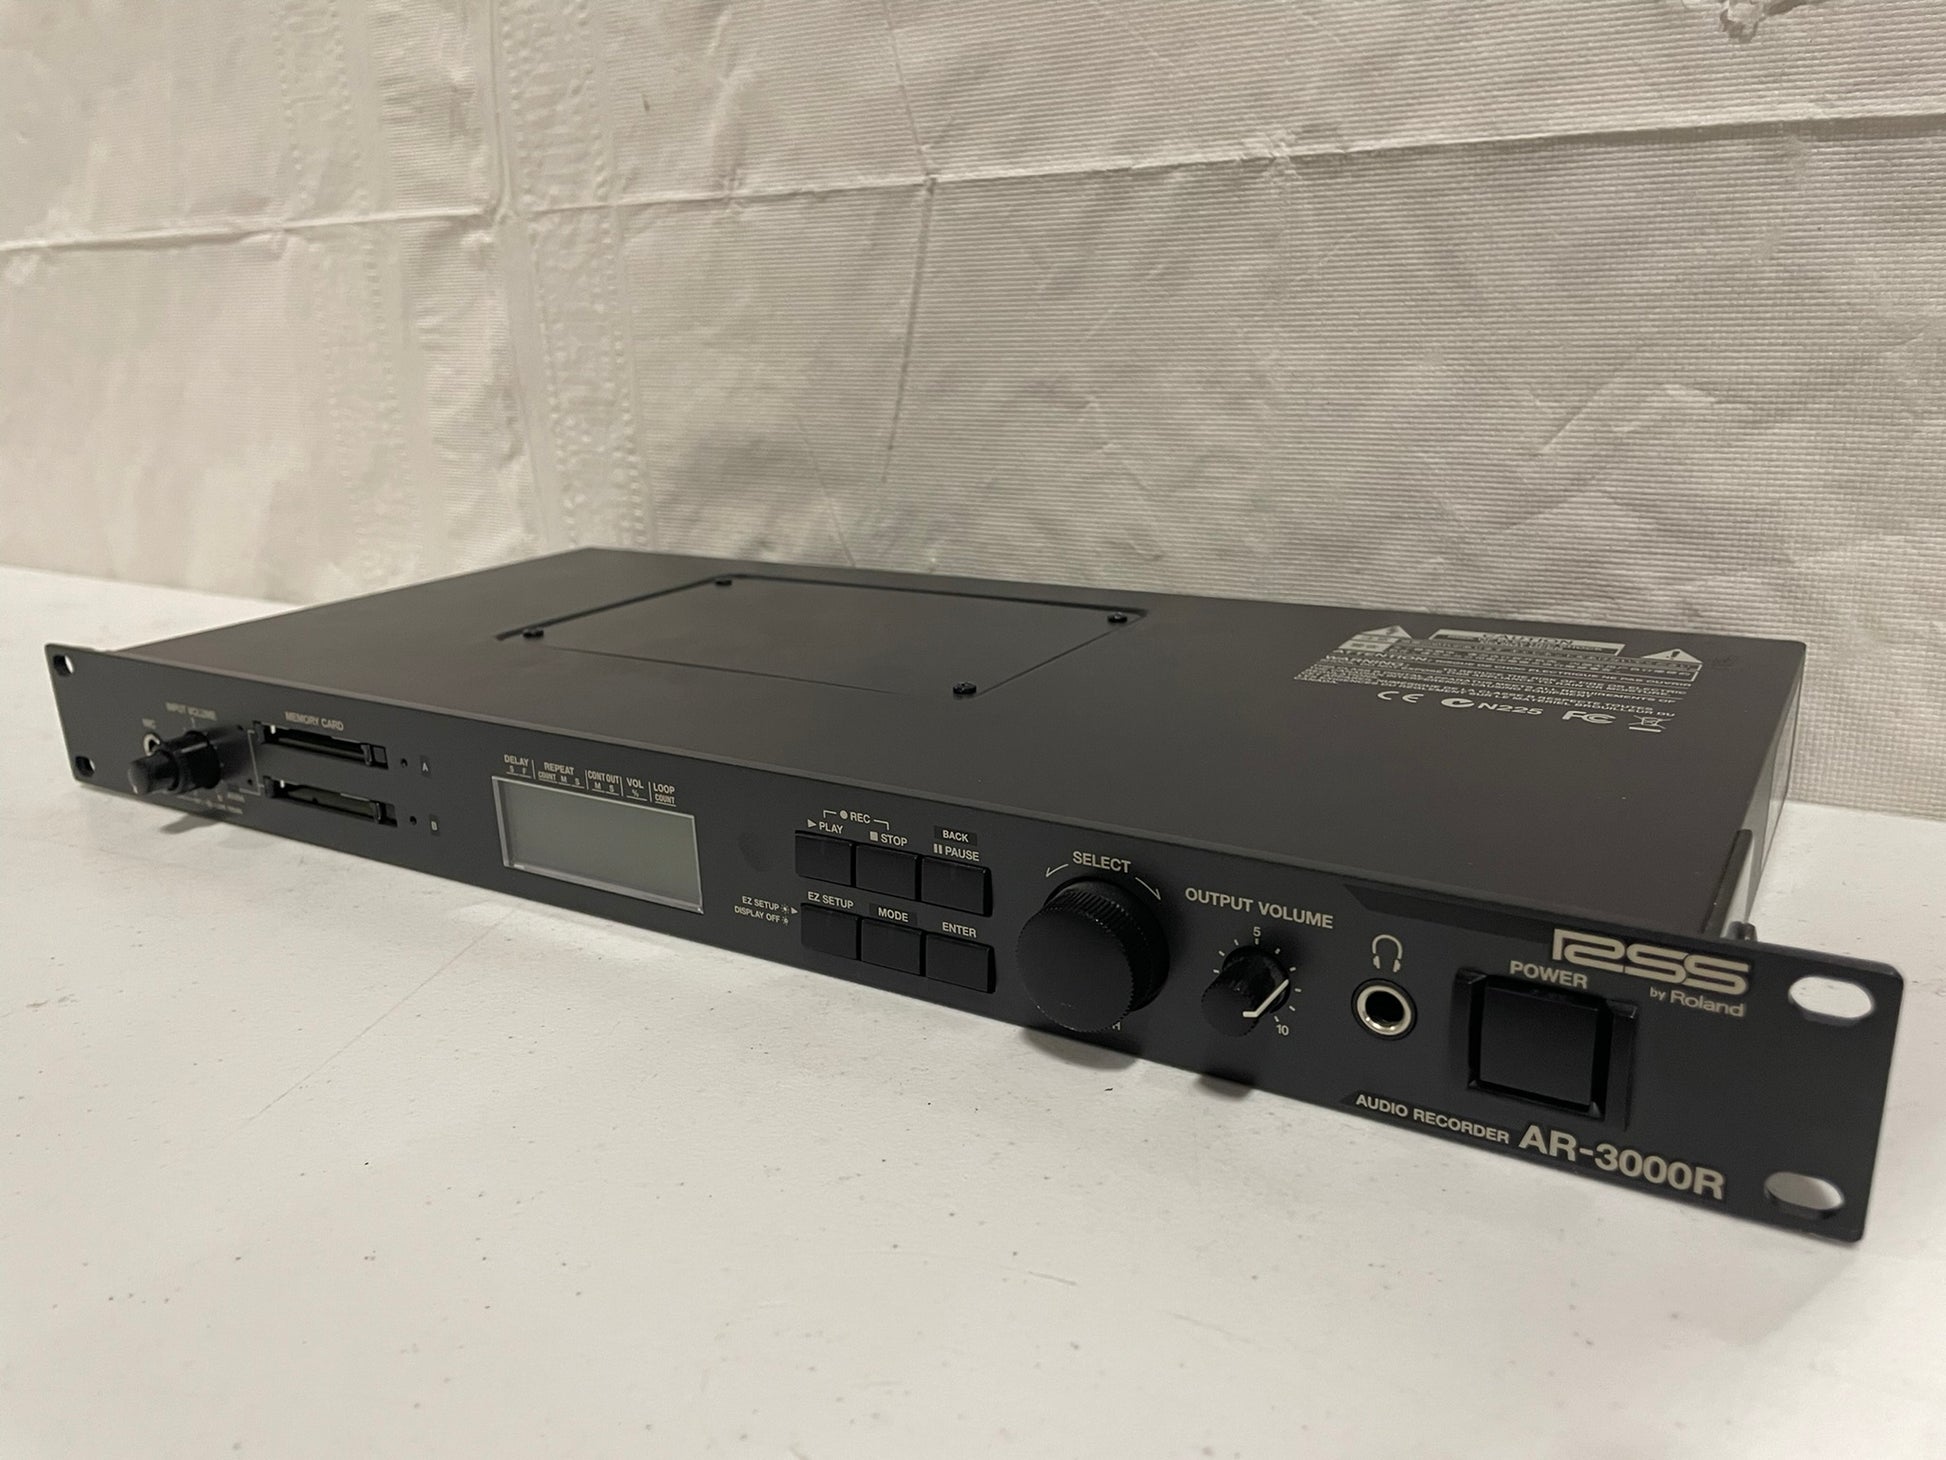 Used Roland AR-3000R Audio Recorder for Sale. We Sell Professional Audio Equipment. Audio Systems, Amplifiers, Consoles, Mixers, Electronics, Entertainment, Sound, Live.